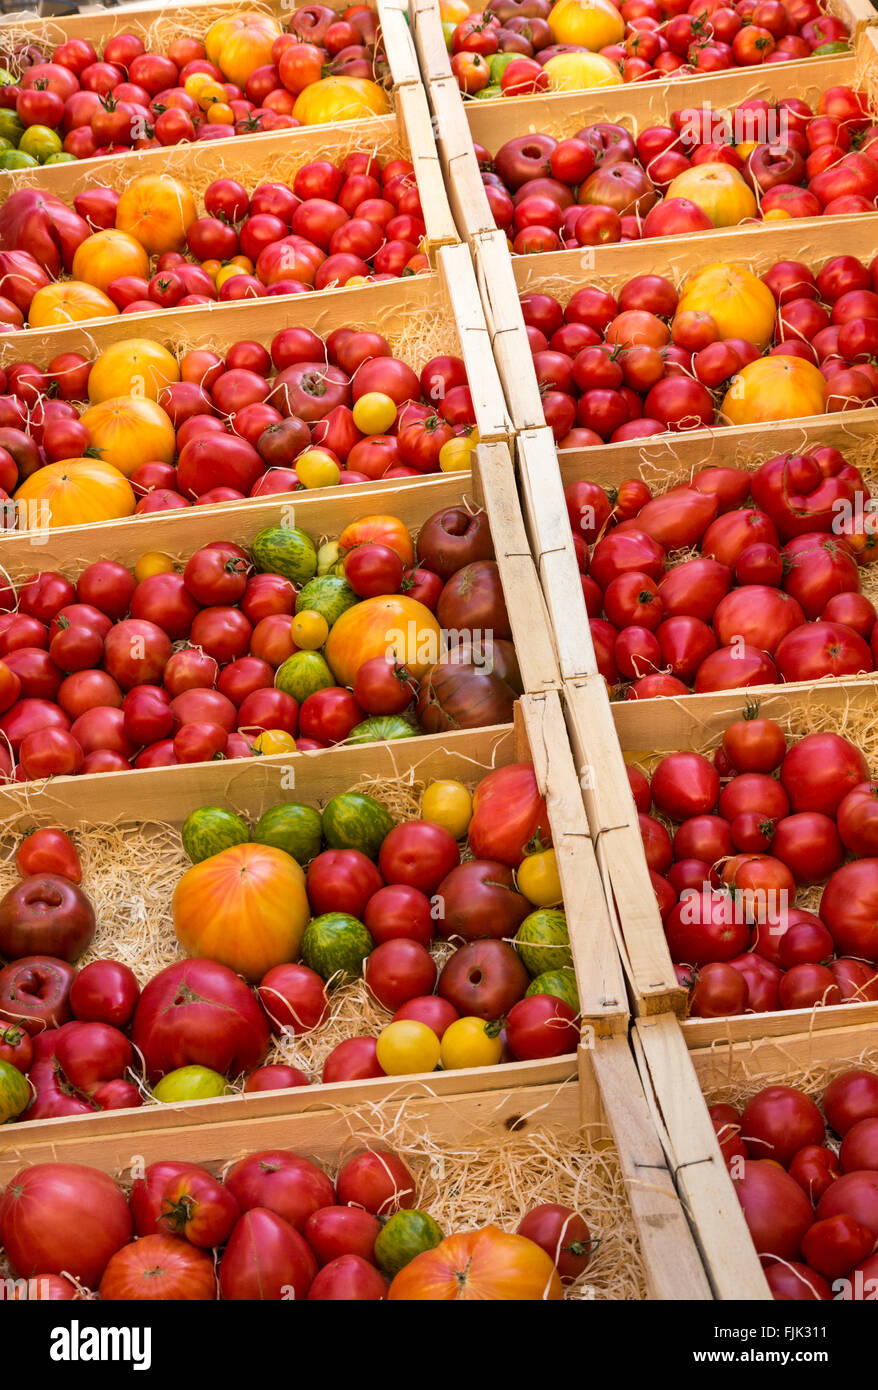 Fresh, organic, red, green and yellow heirloom tomatoes displayed in wooden crates at a local food market, Paris, France Stock Photo